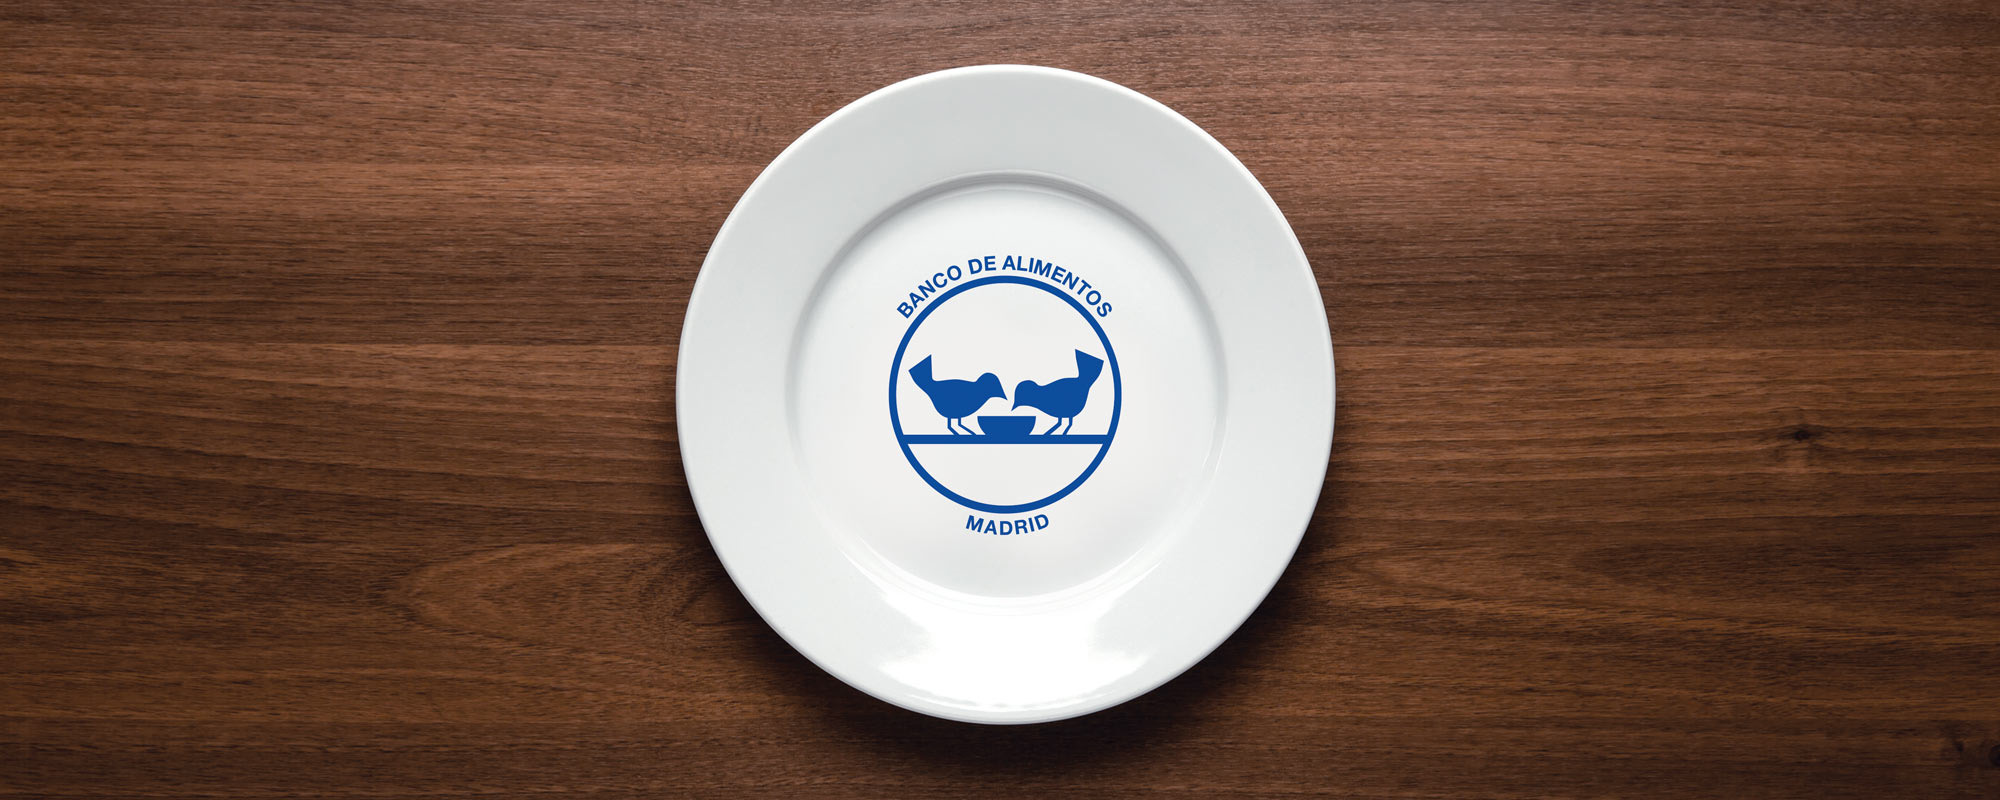 White plate on table with blue design on it of two birds eating out of a bowl with the text 'Banco De Alimentos Madrid'